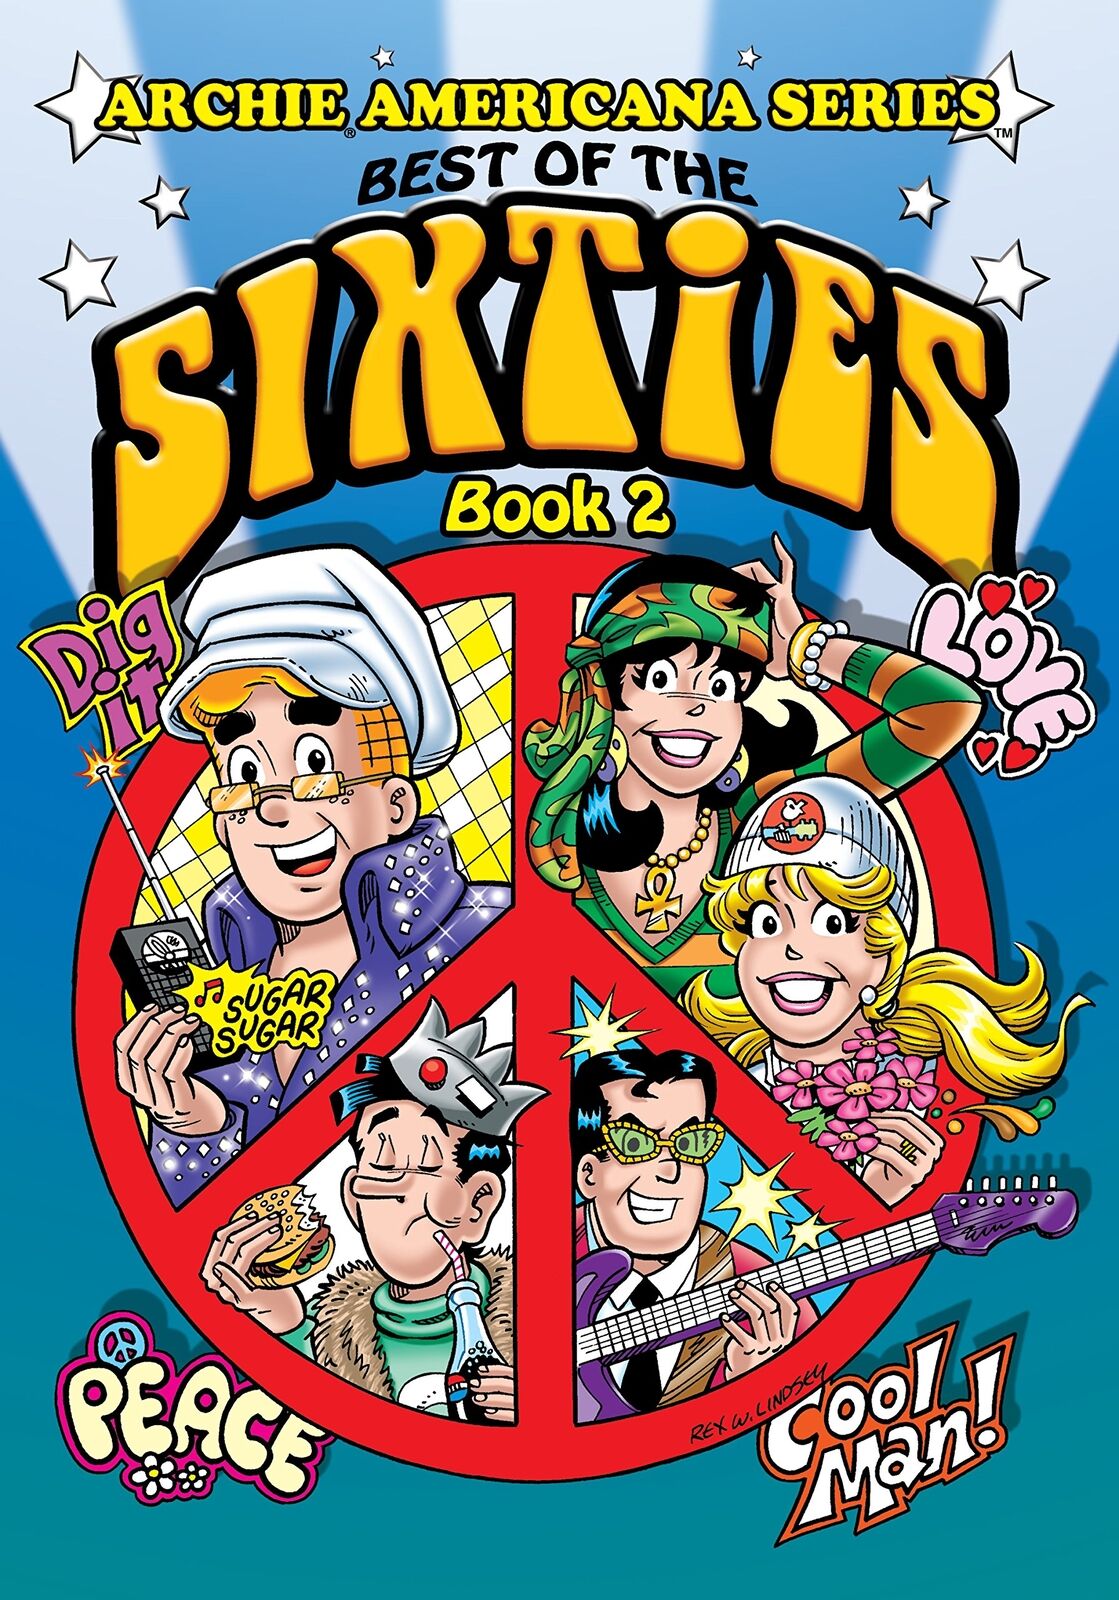 Best of the Sixties / Book #2 (Archie Americana Series)